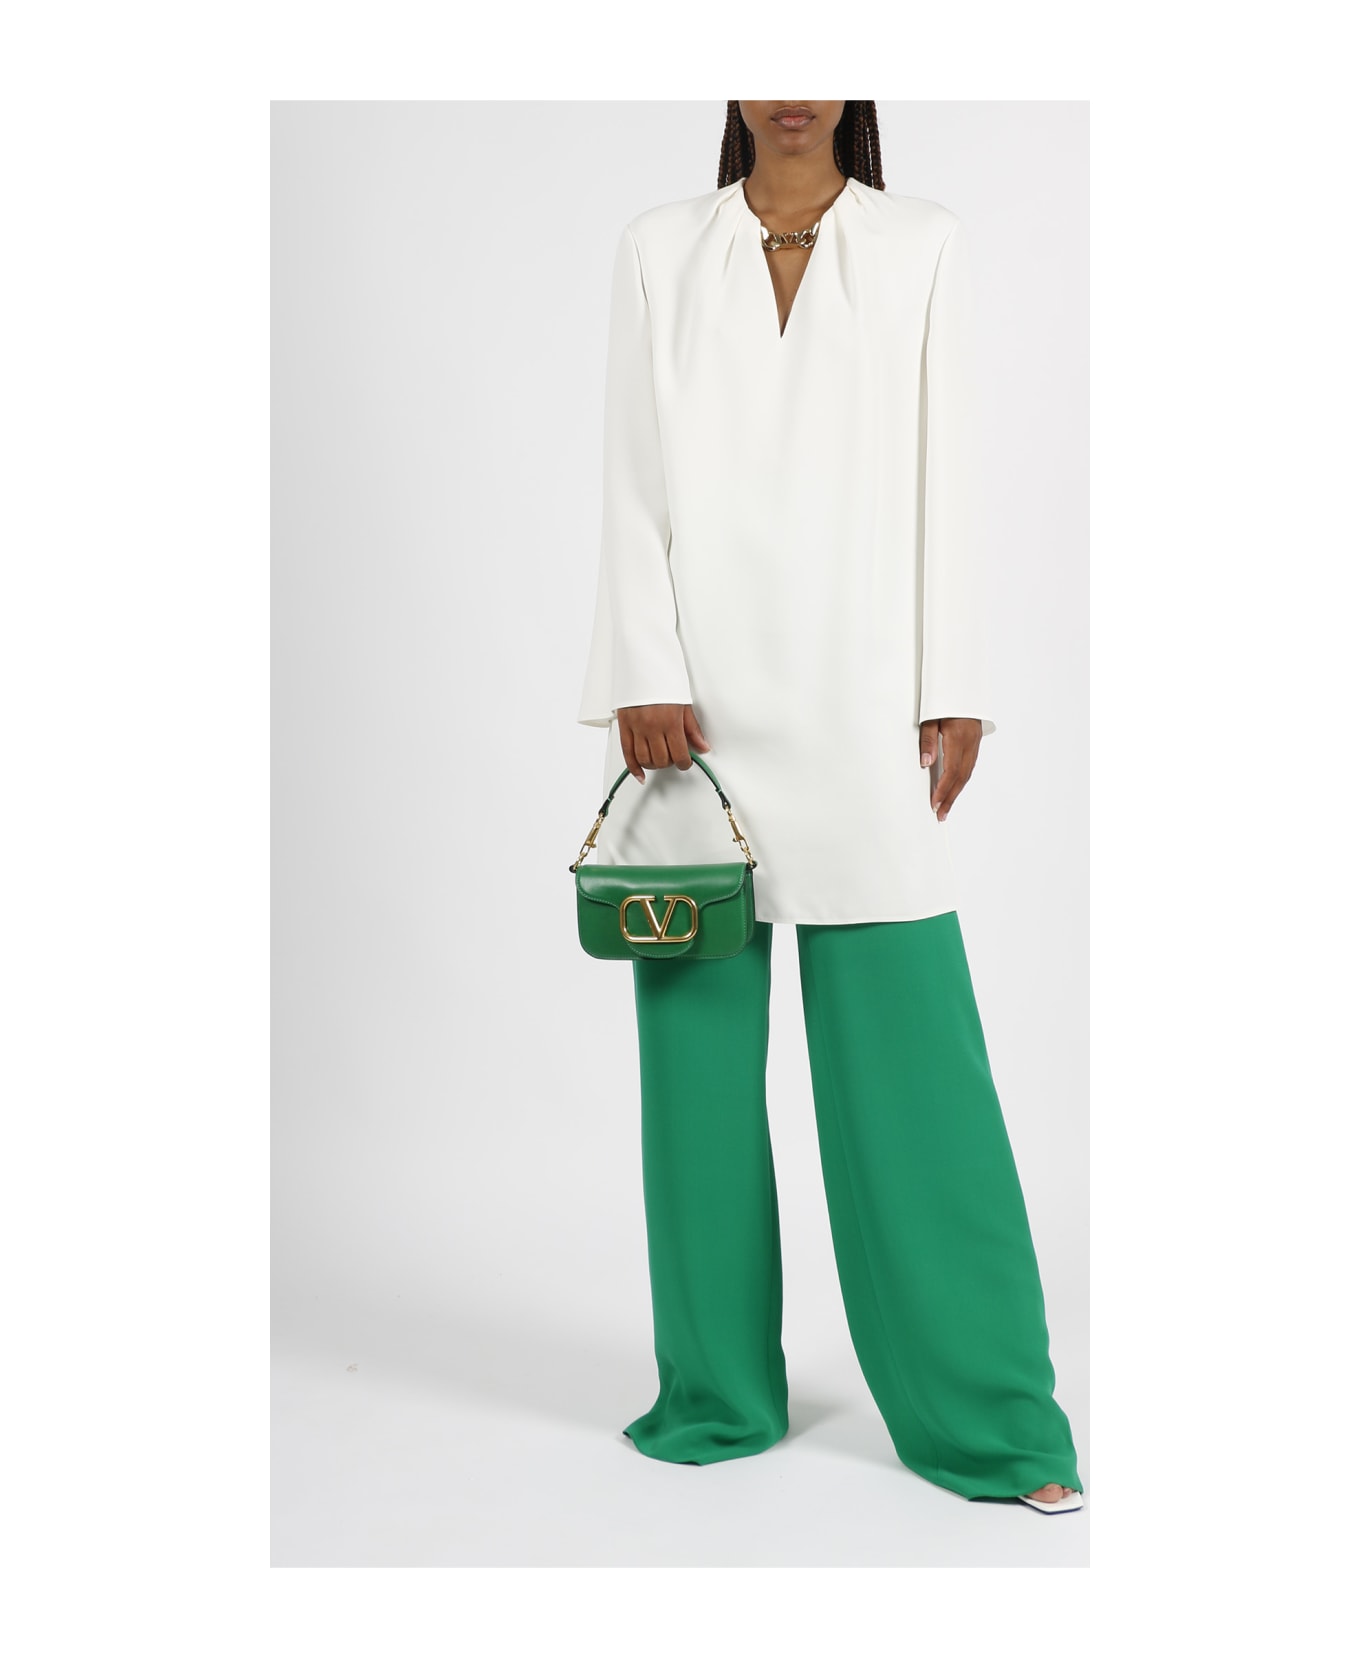 Valentino Cady Couture Trousers - Green